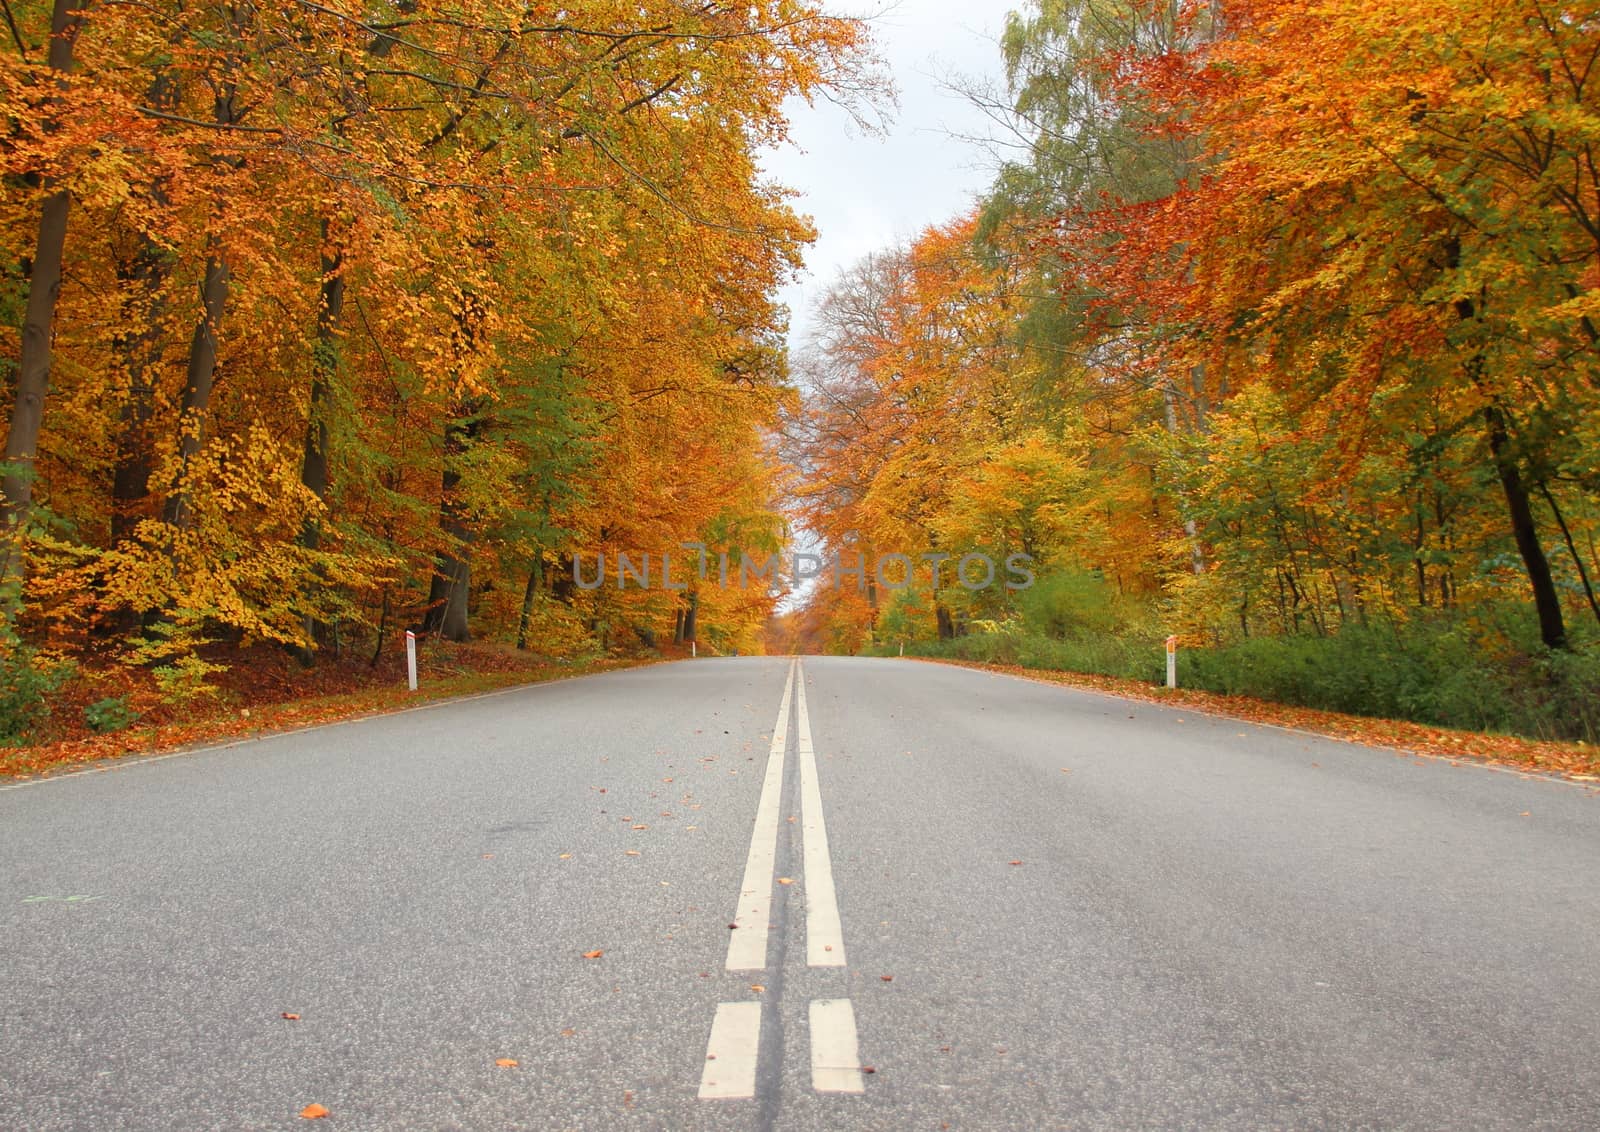 Center stripes on road in autumn forest with beautiful colors